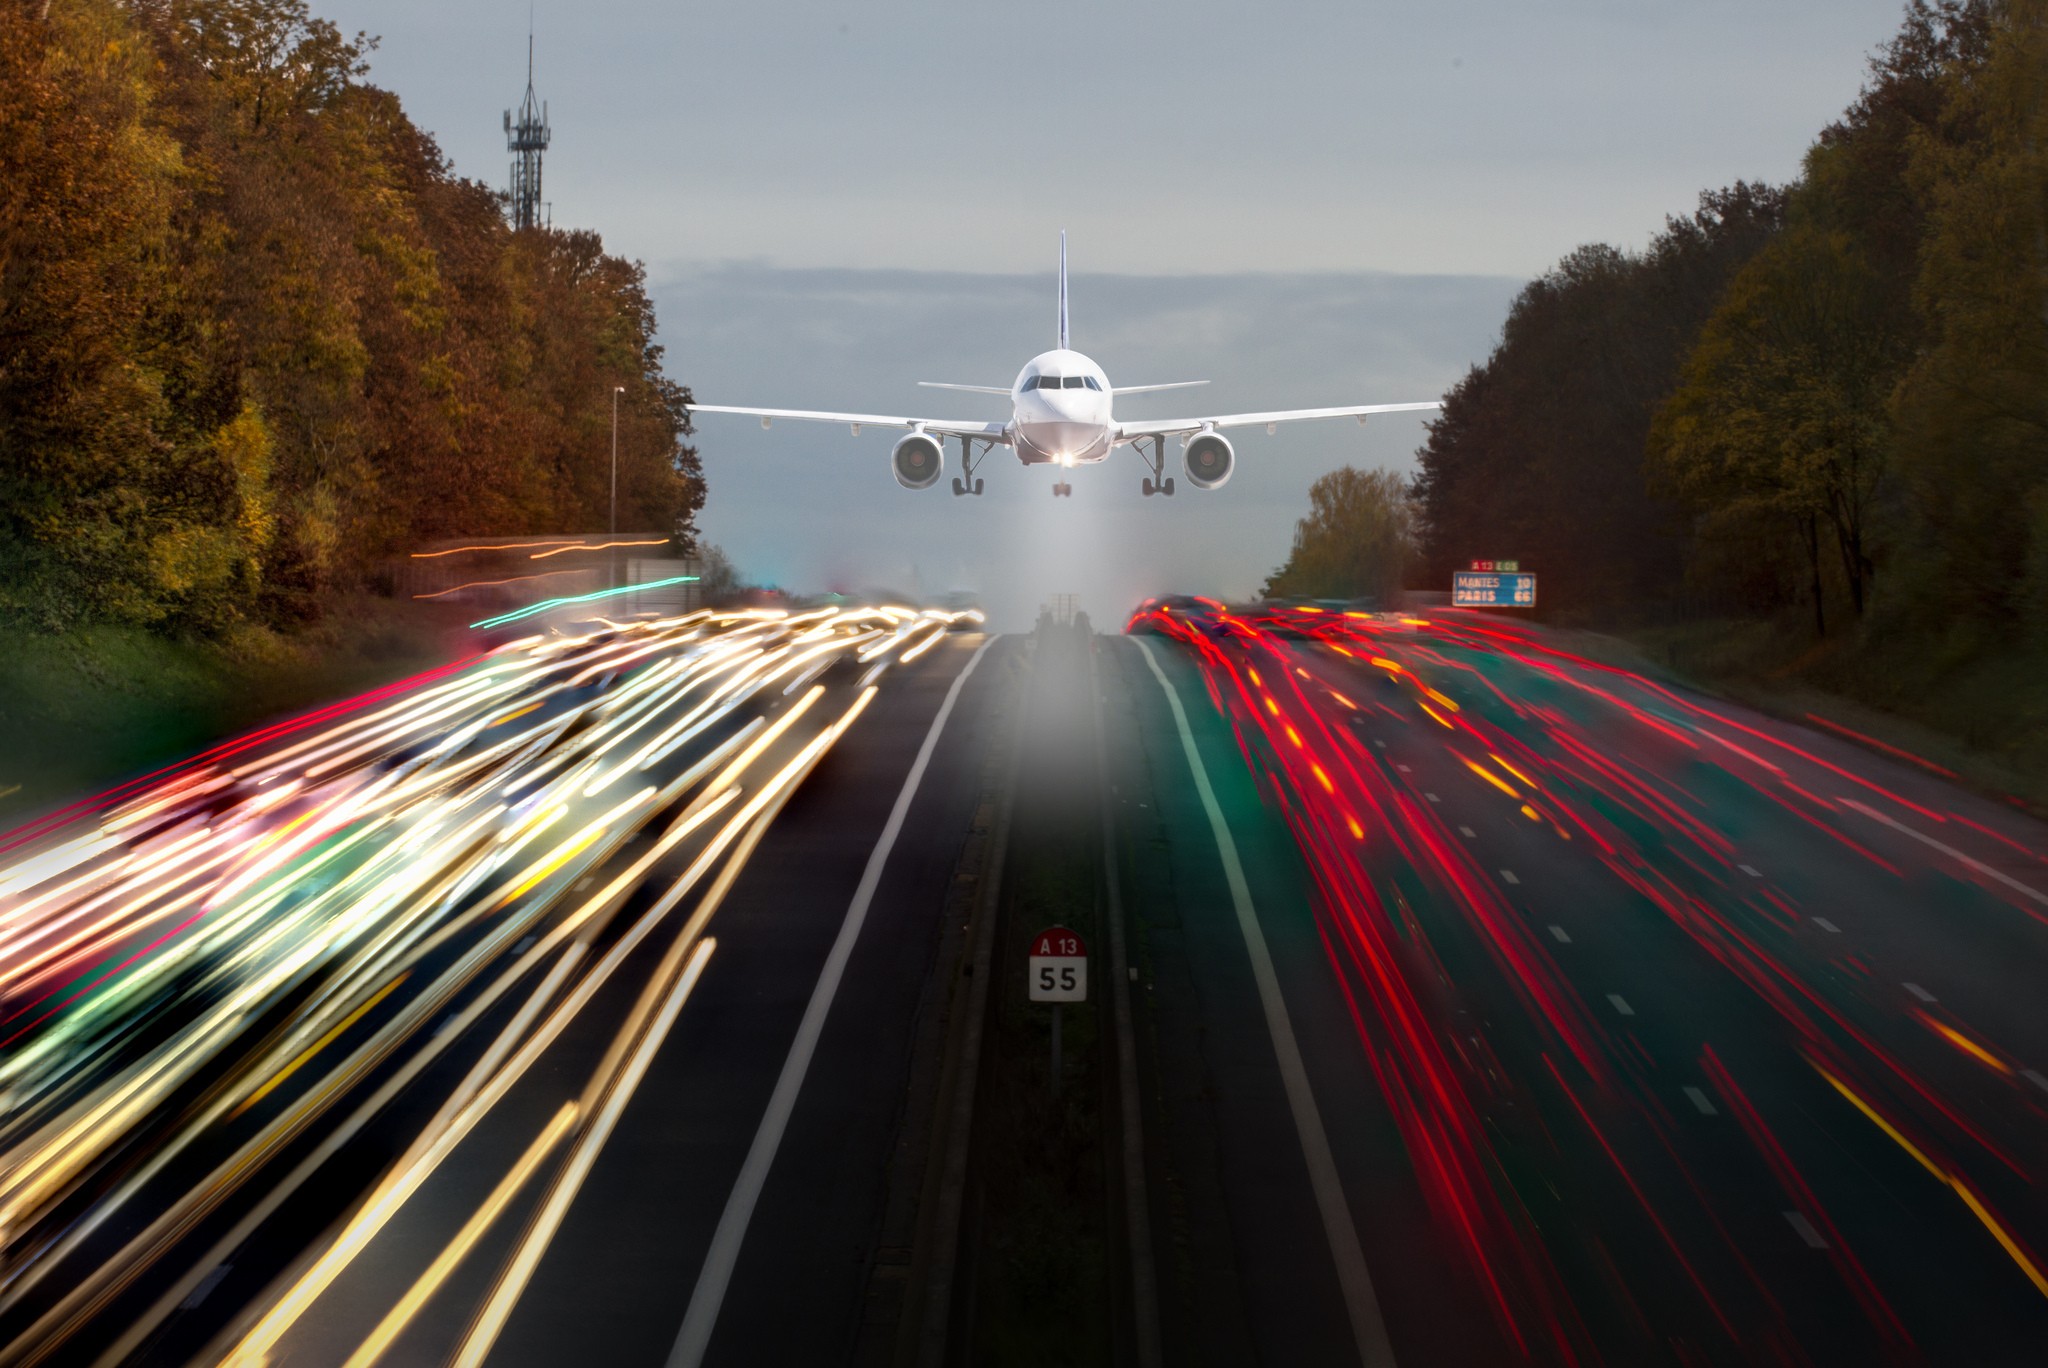 lights, Long Exposure, Road, Highway, Airplane, France, Road Sign, Trees, Car, Light Trails Wallpaper